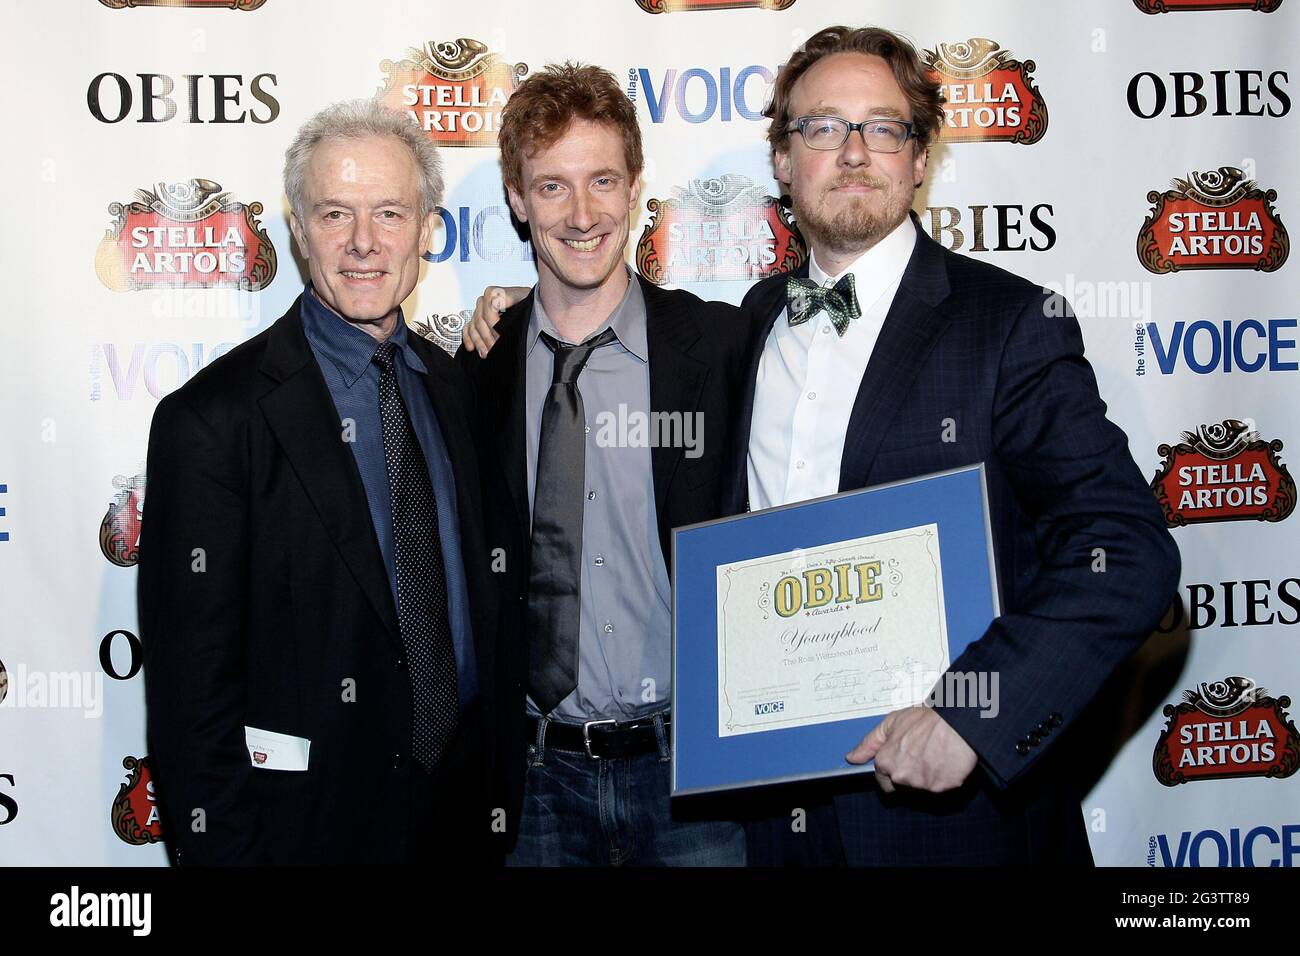 New York, NY, USA. 21 May, 2012. William Carden, Graeme Gillis, R.J. Tolan at the 57th annual Obie awards at Webster Hall. Credit: Steve Mack/Alamy Stock Photo